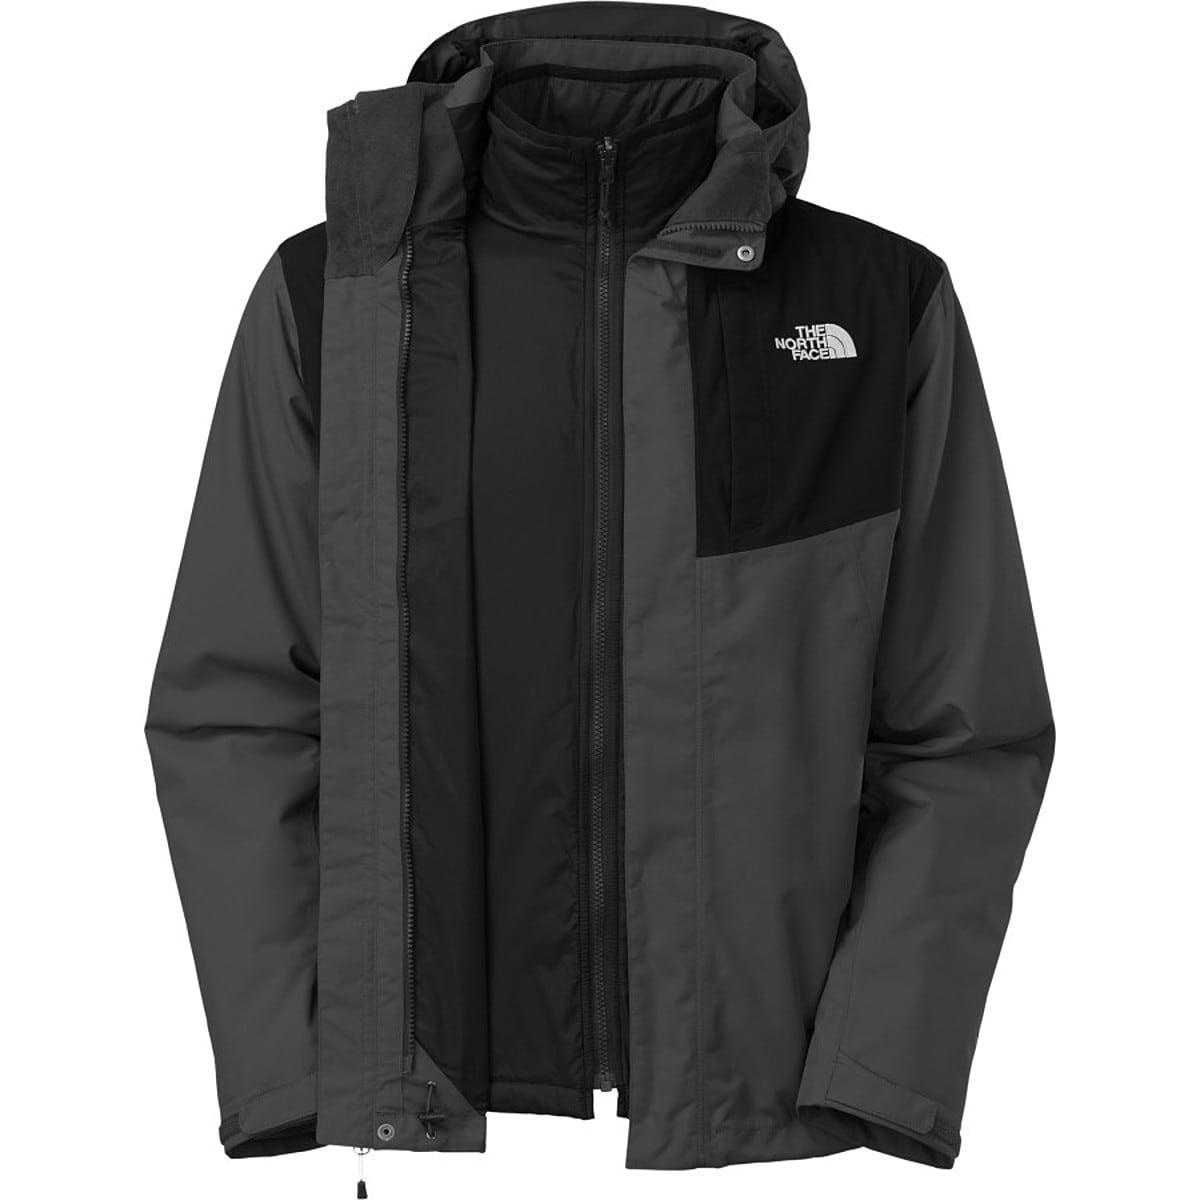 The North Face Grey Peak Triclimate Jacket - Men's - Clothing